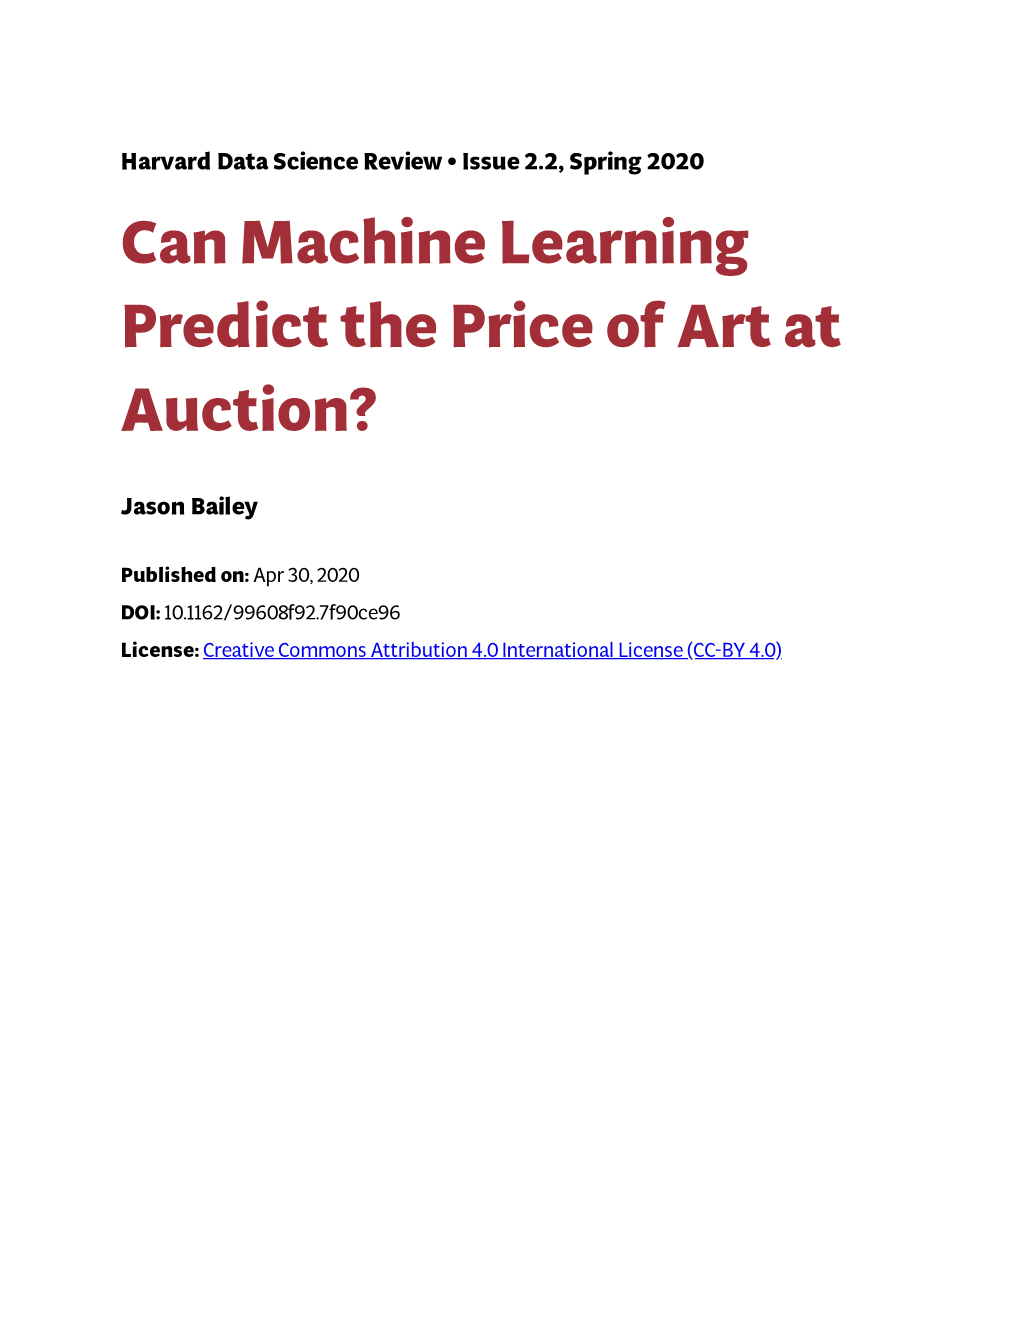 Can Machine Learning Predict the Price of Art at Auction?